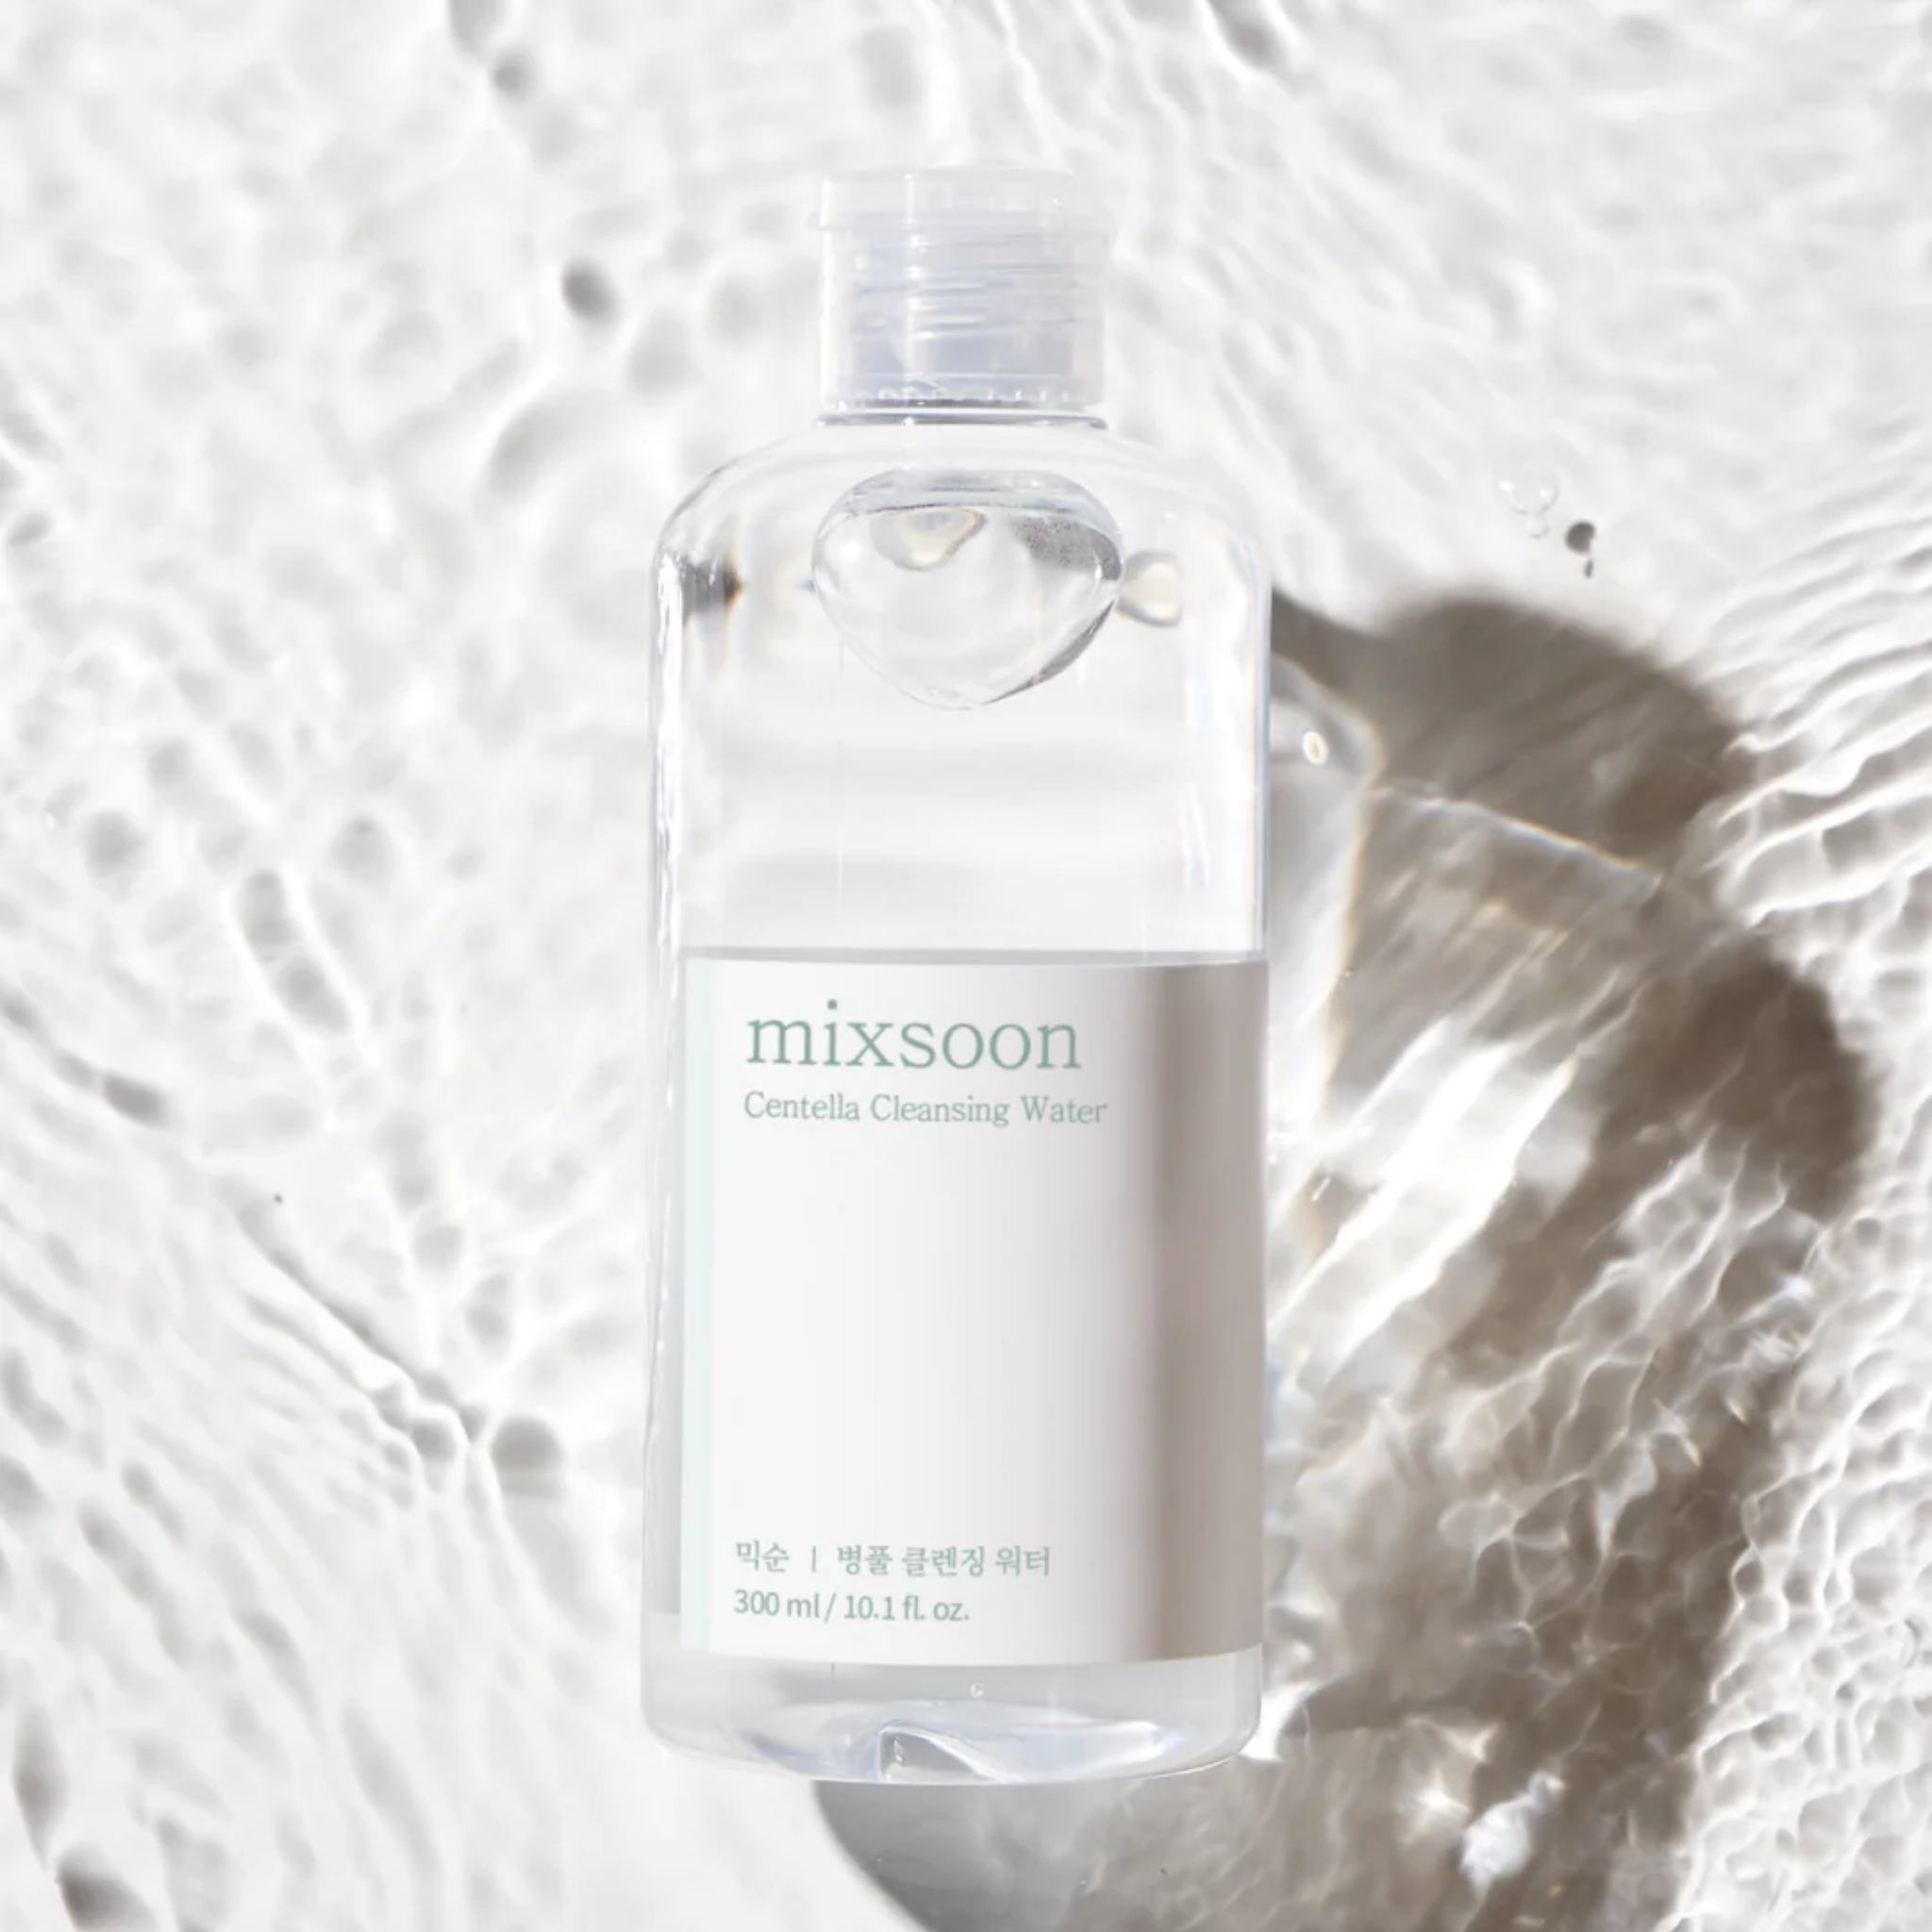 Mixsoon Centella Cleansing Water (300ml) water background